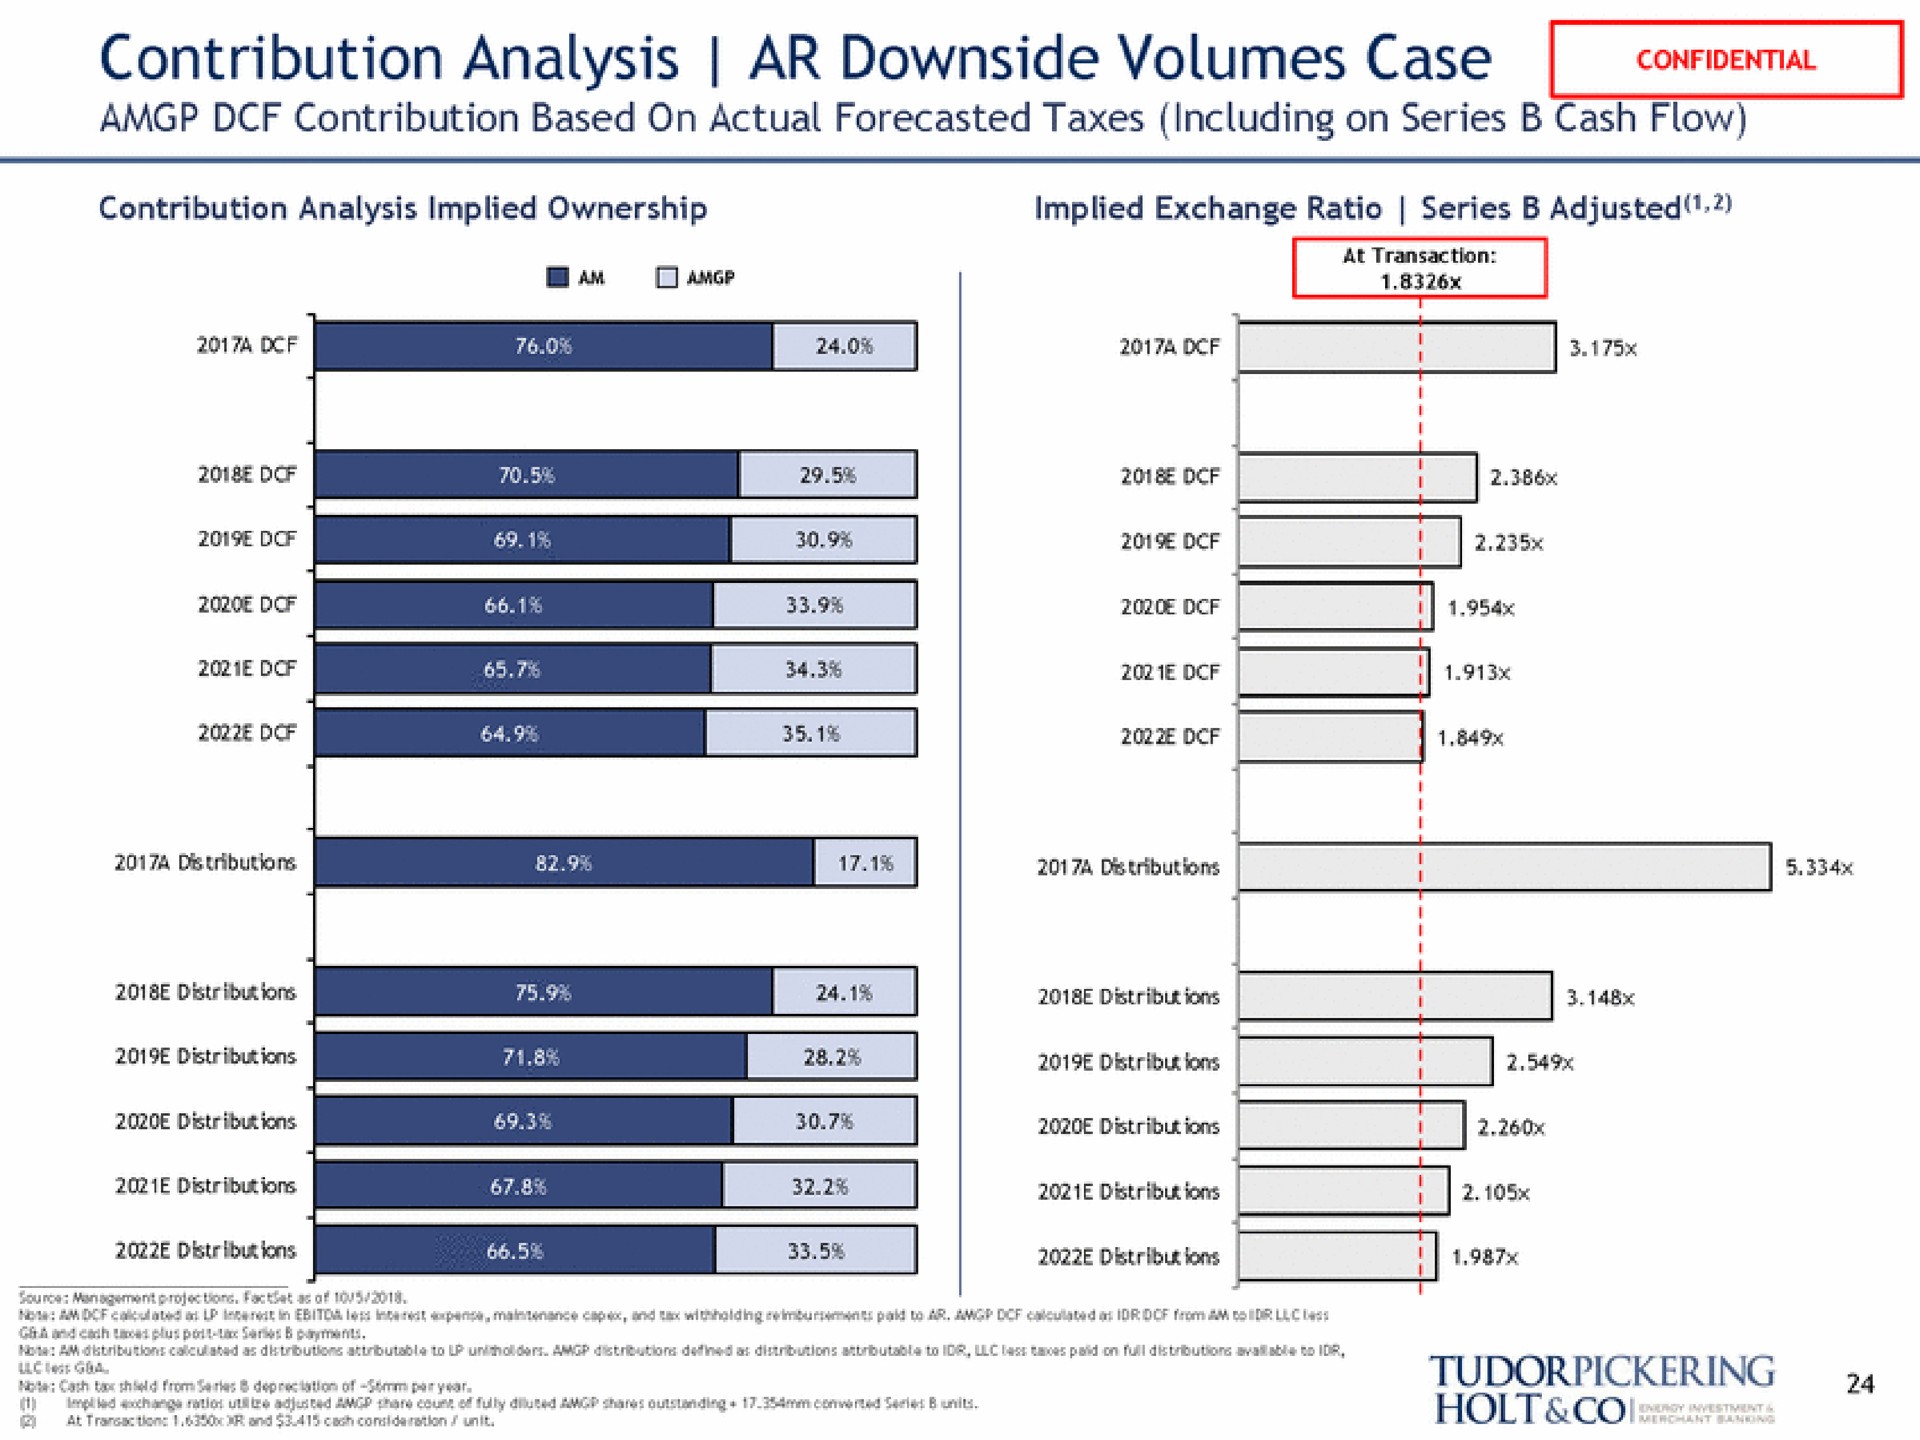 contribution analysis downside volumes case contribution based on actual forecasted taxes including on series cash flow zone a series holt | Tudor, Pickering, Holt & Co